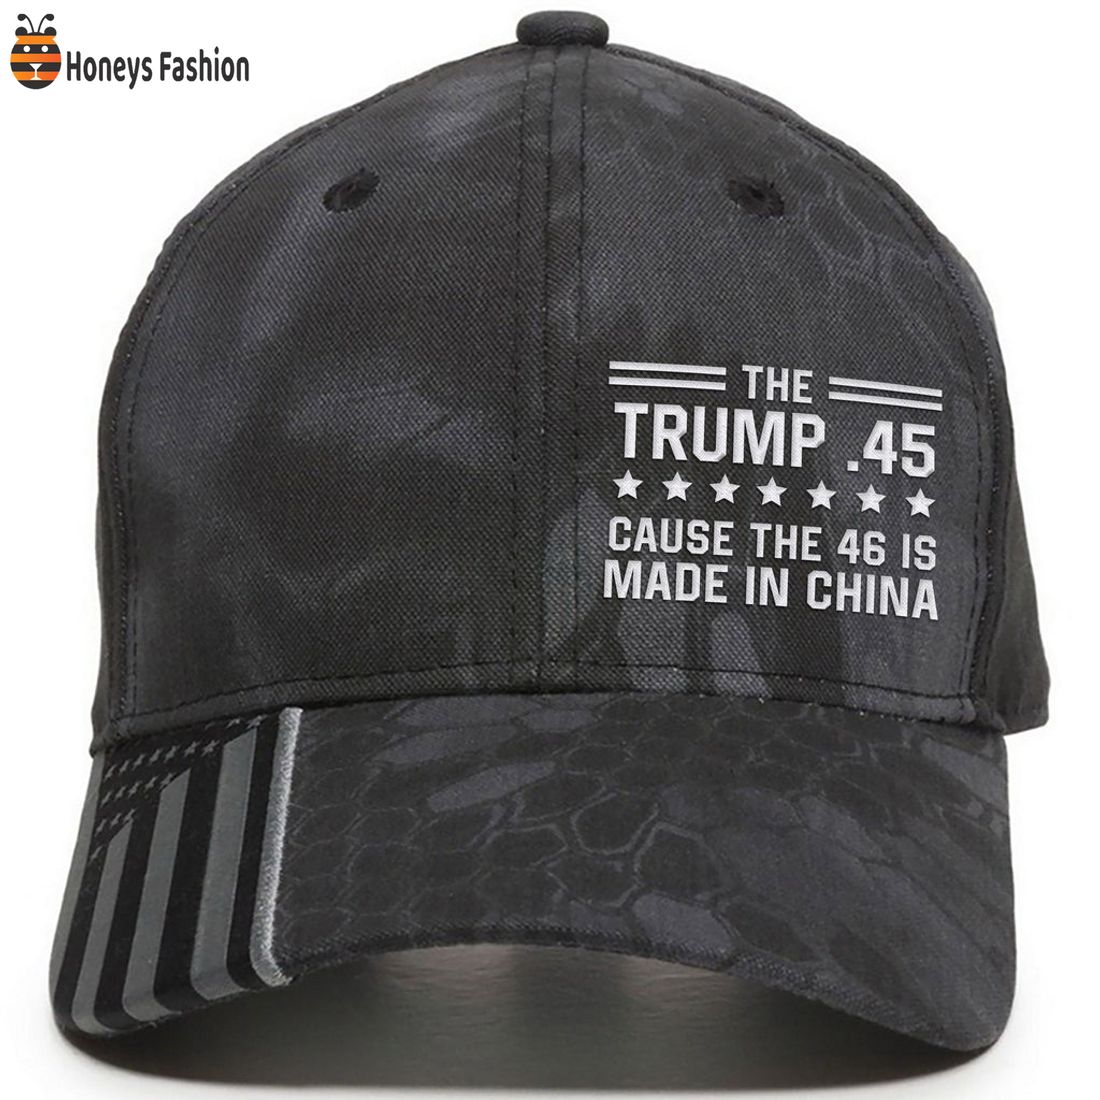 HOT The Trump 45 Cause The 46 Is Made In China Classic Cap